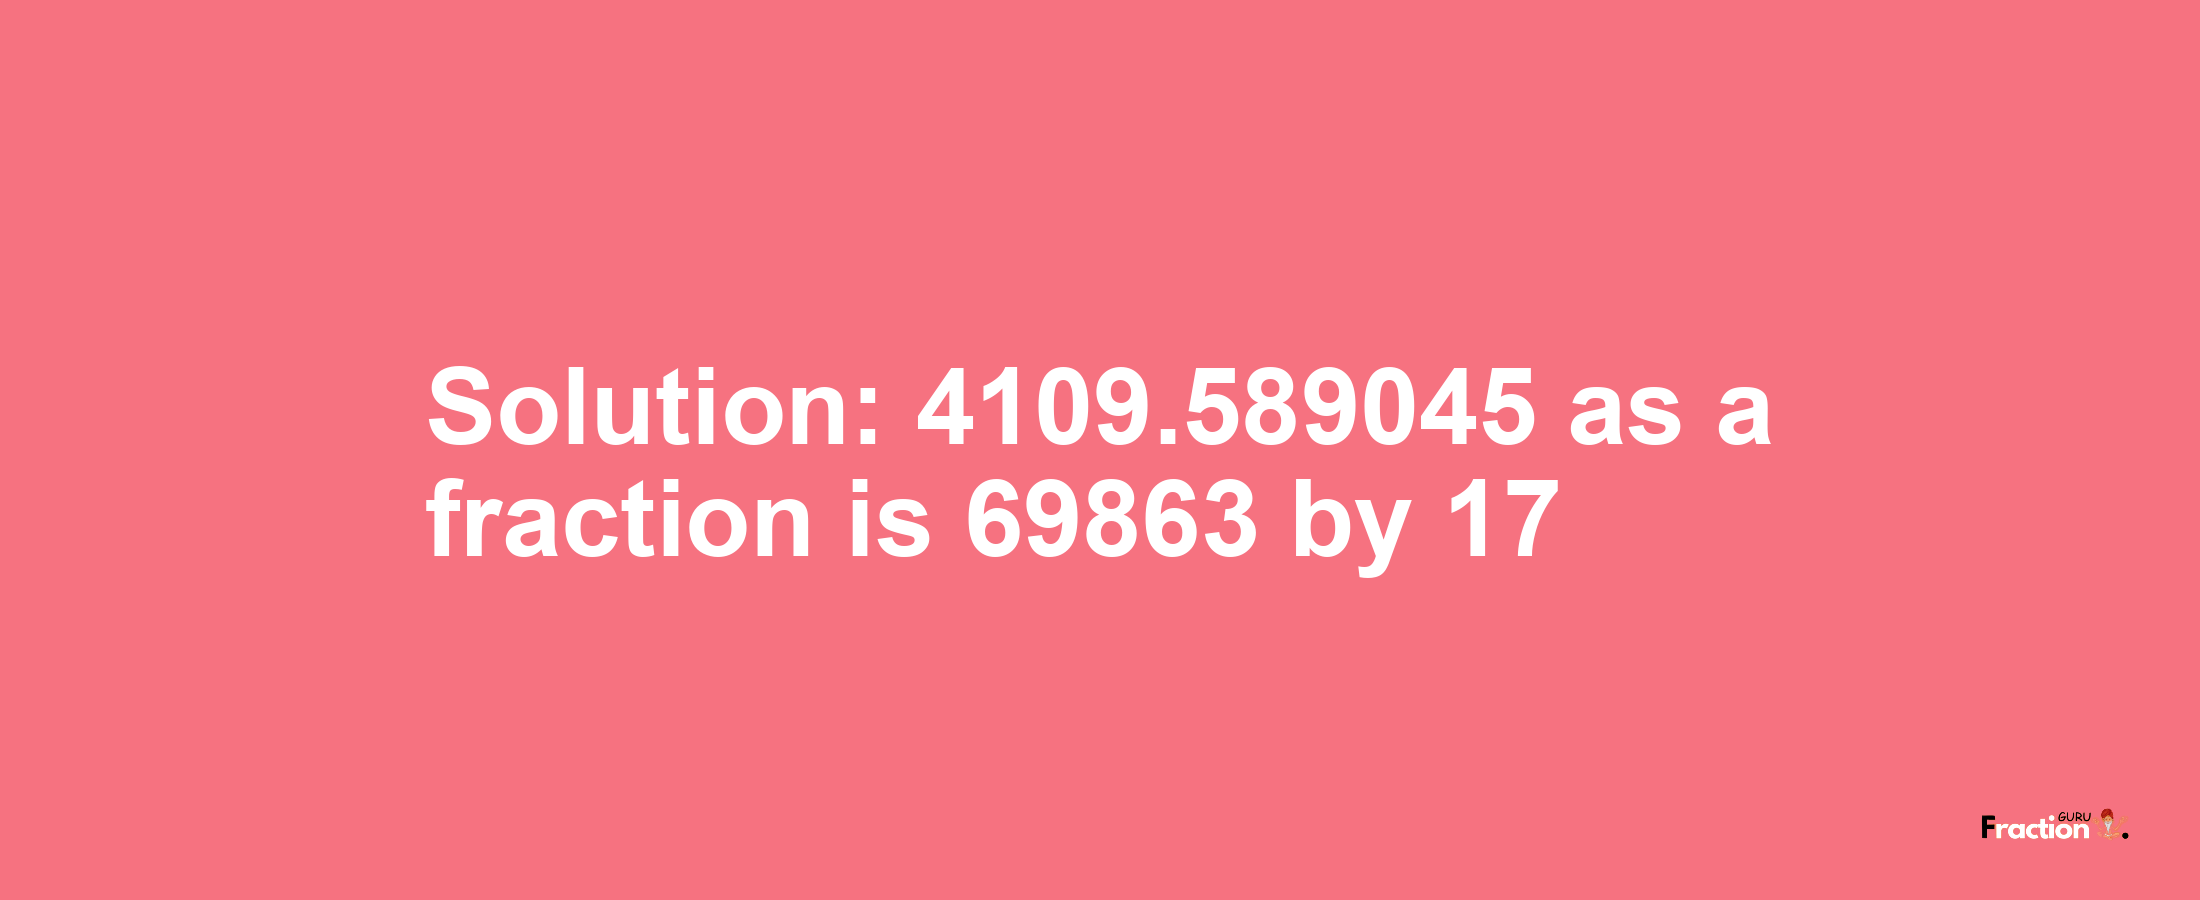 Solution:4109.589045 as a fraction is 69863/17